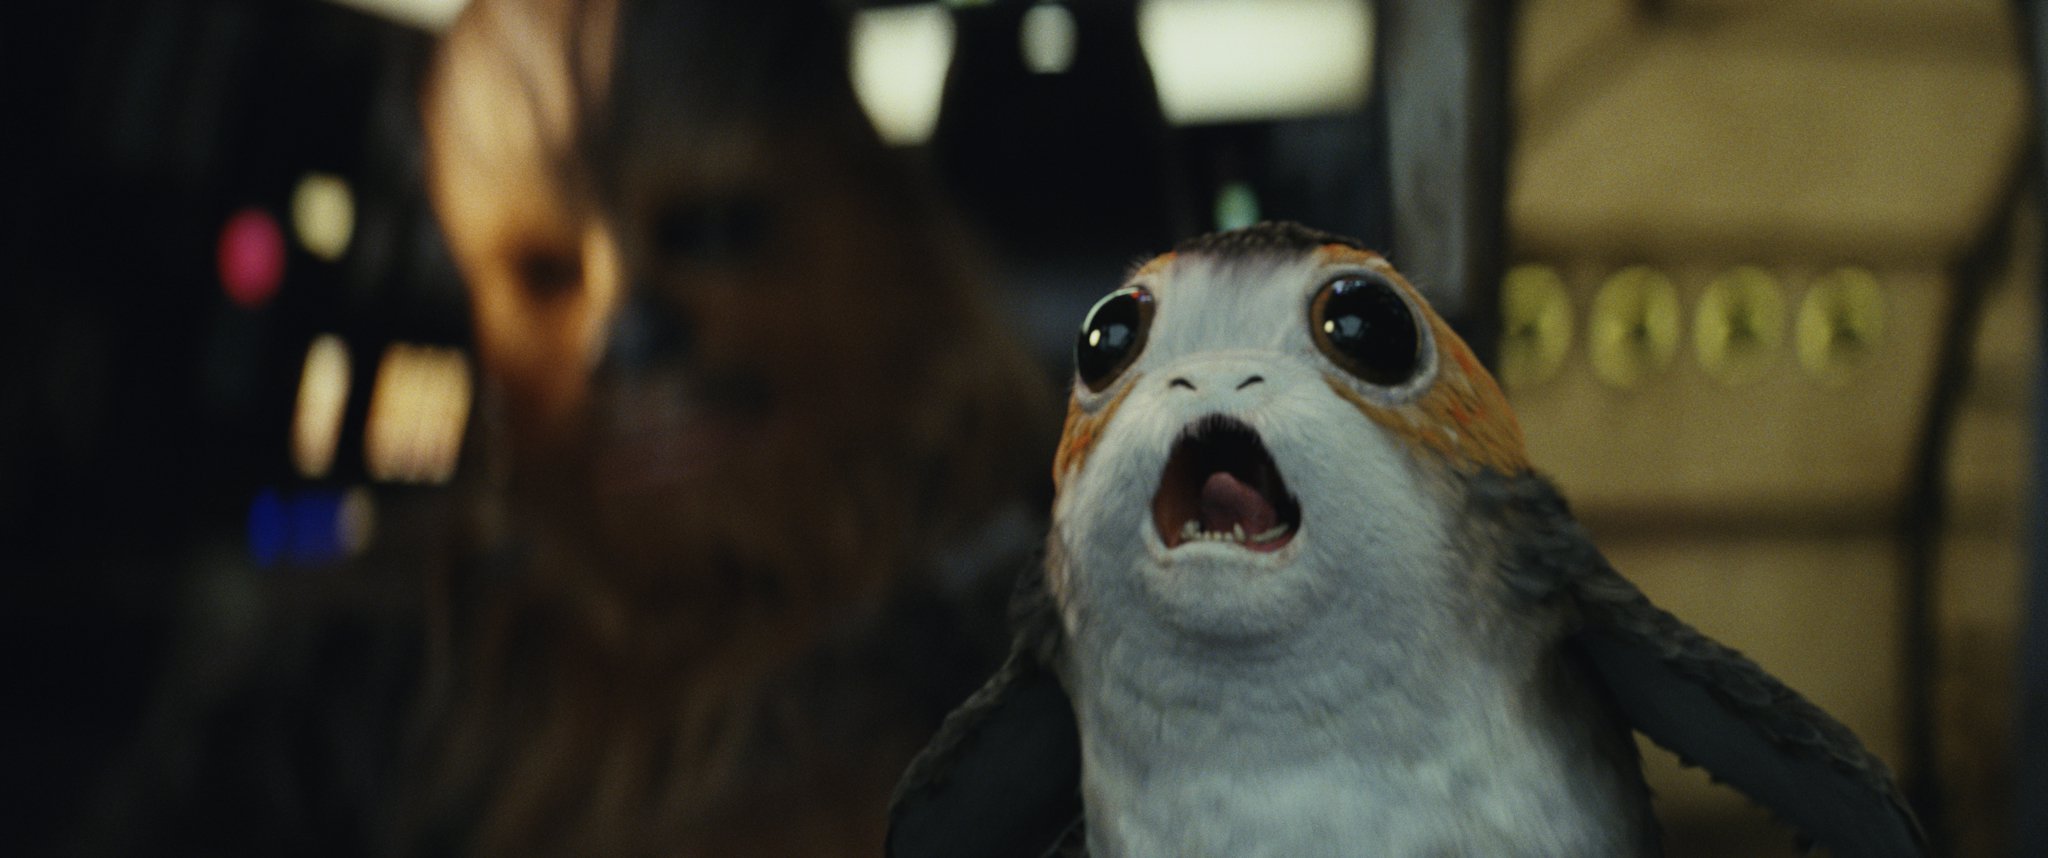 cutest character porgs